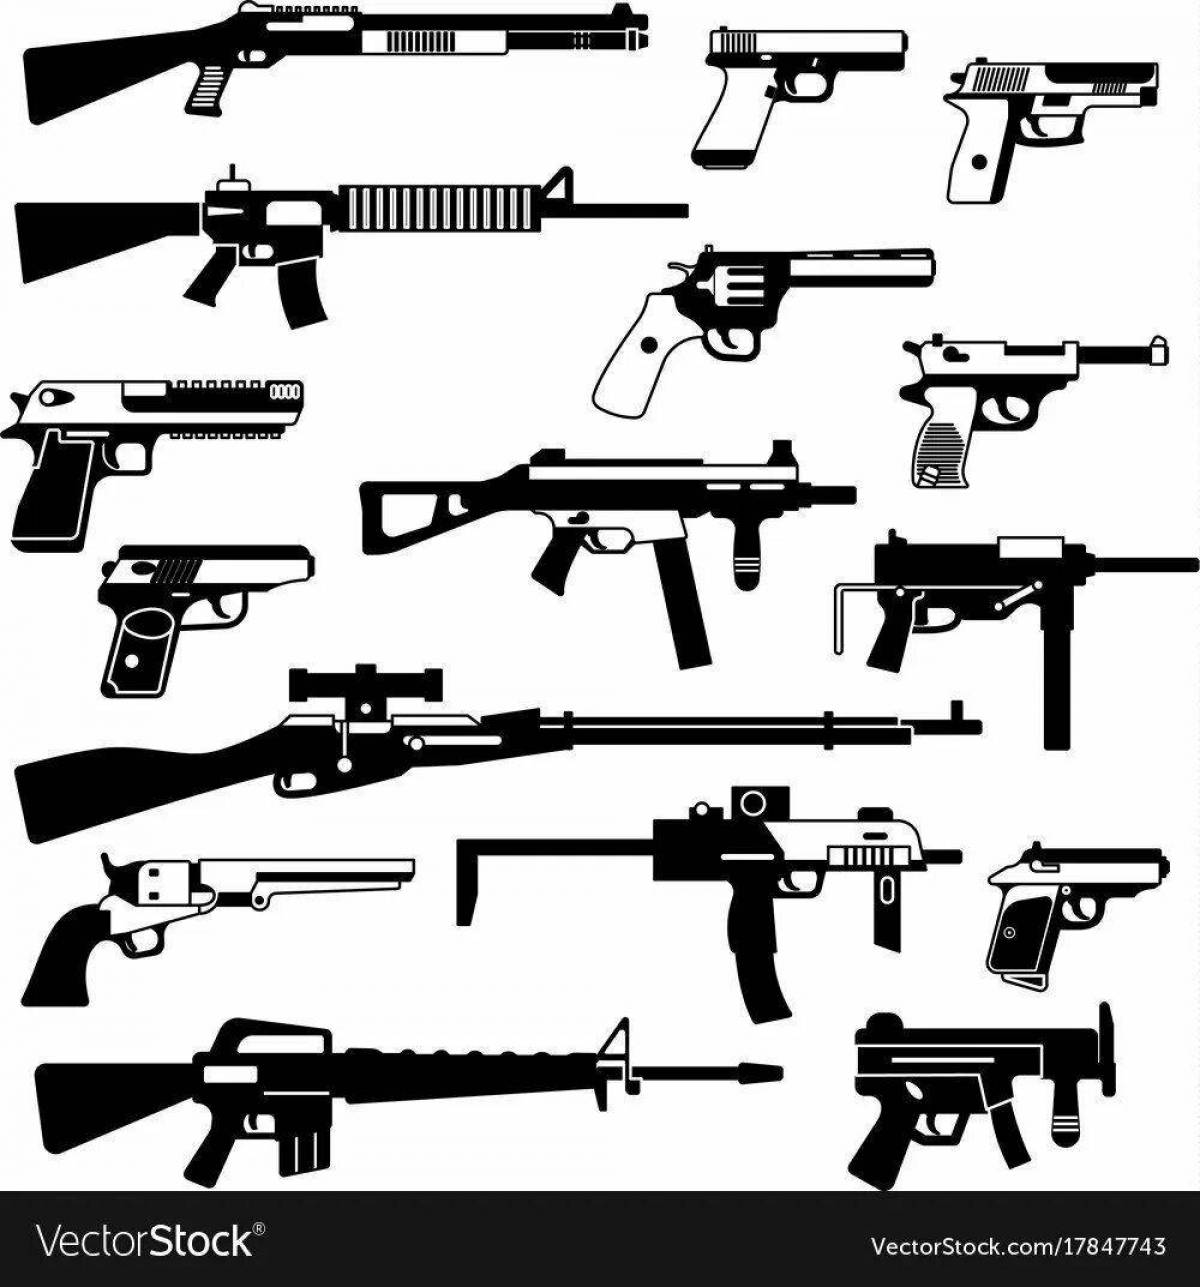 Adorable firearms coloring page